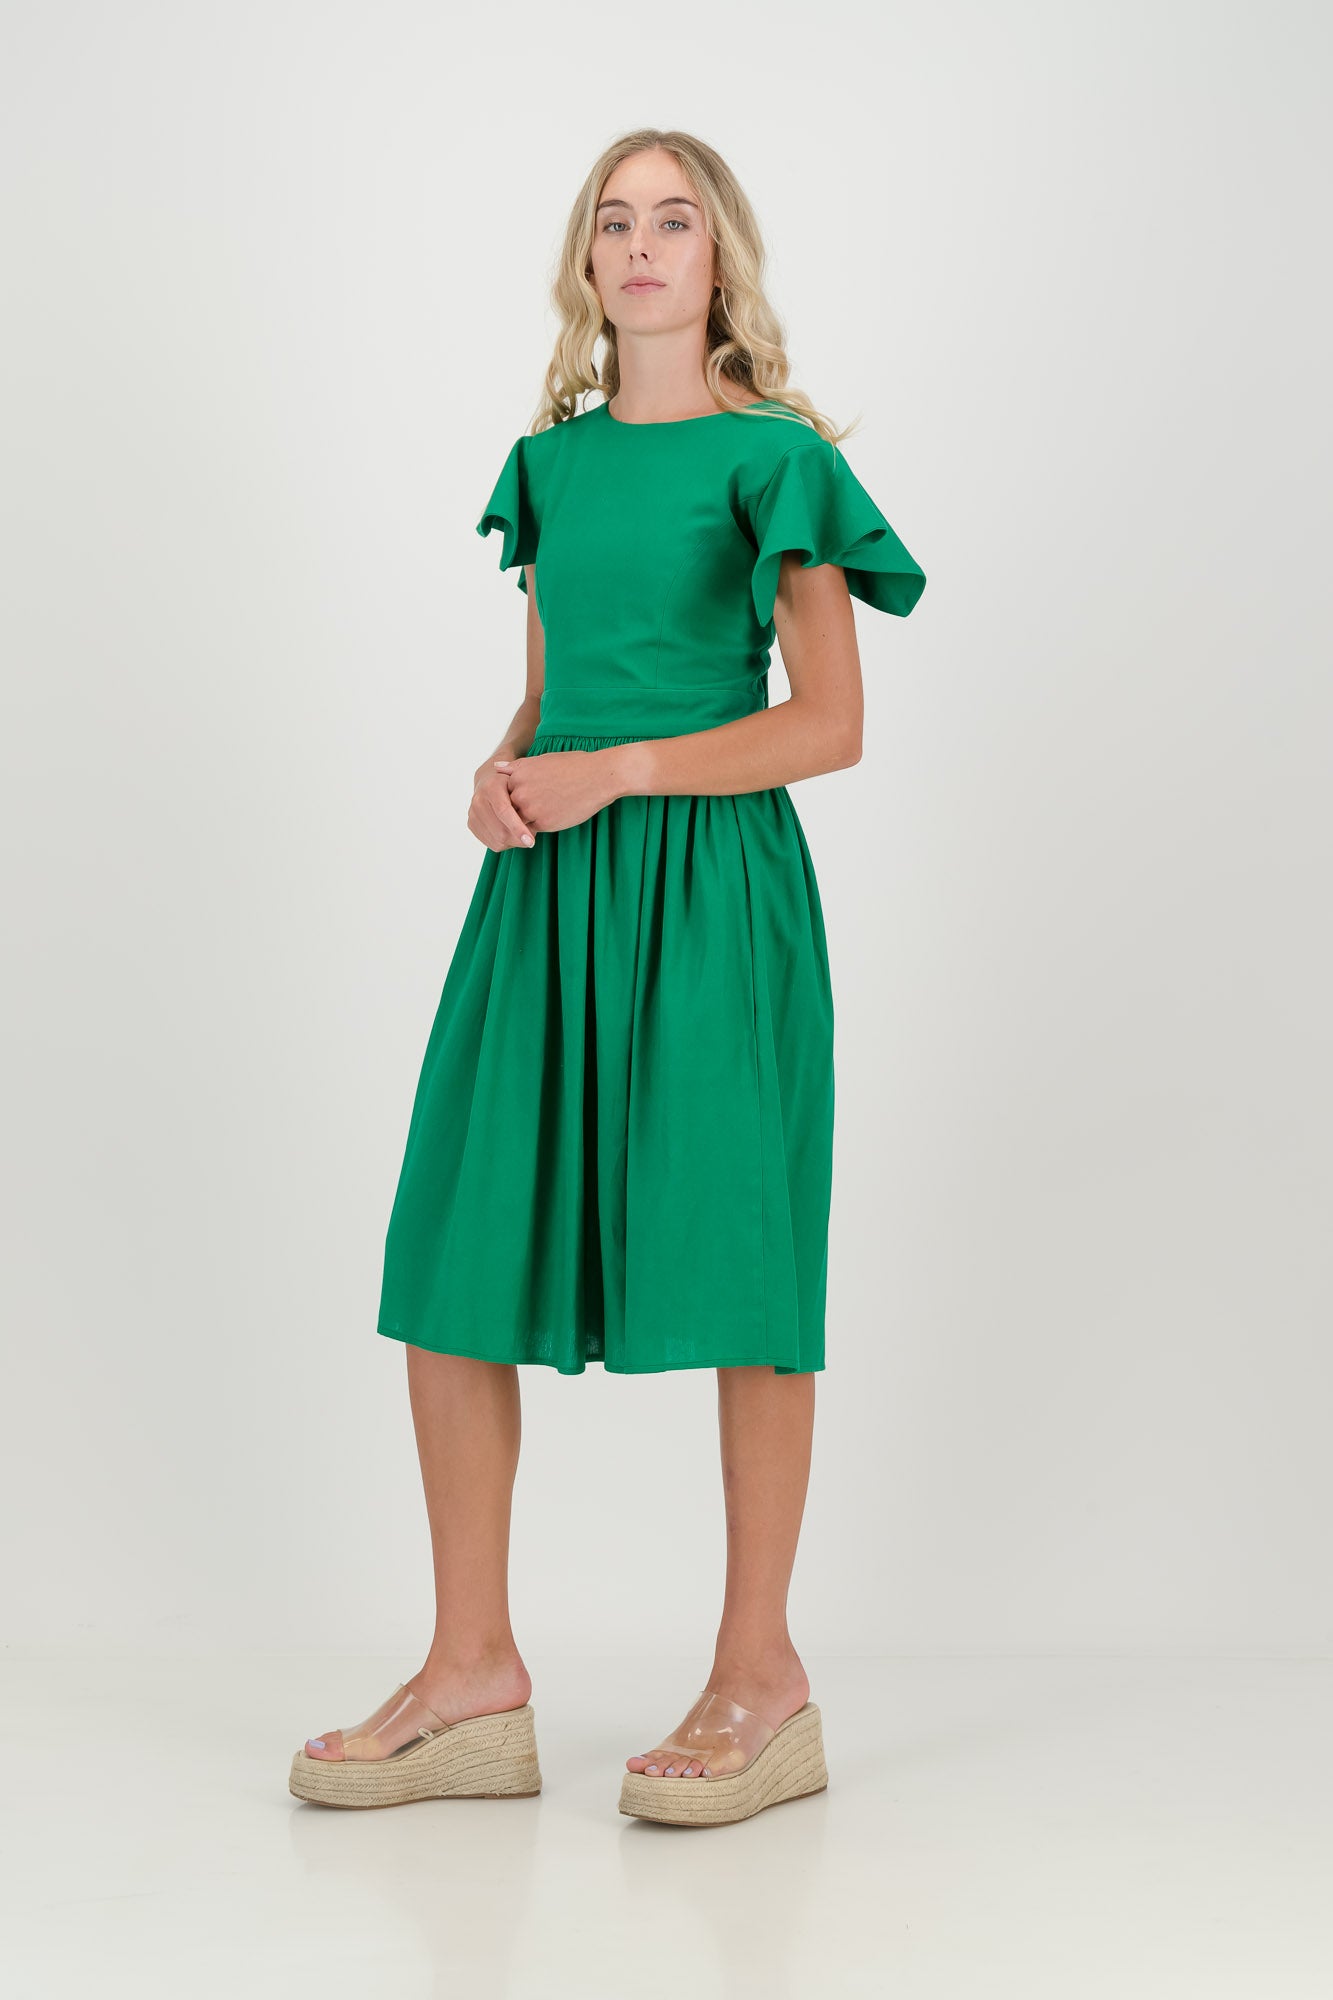 The Forest Green Camelia Open Back Dress